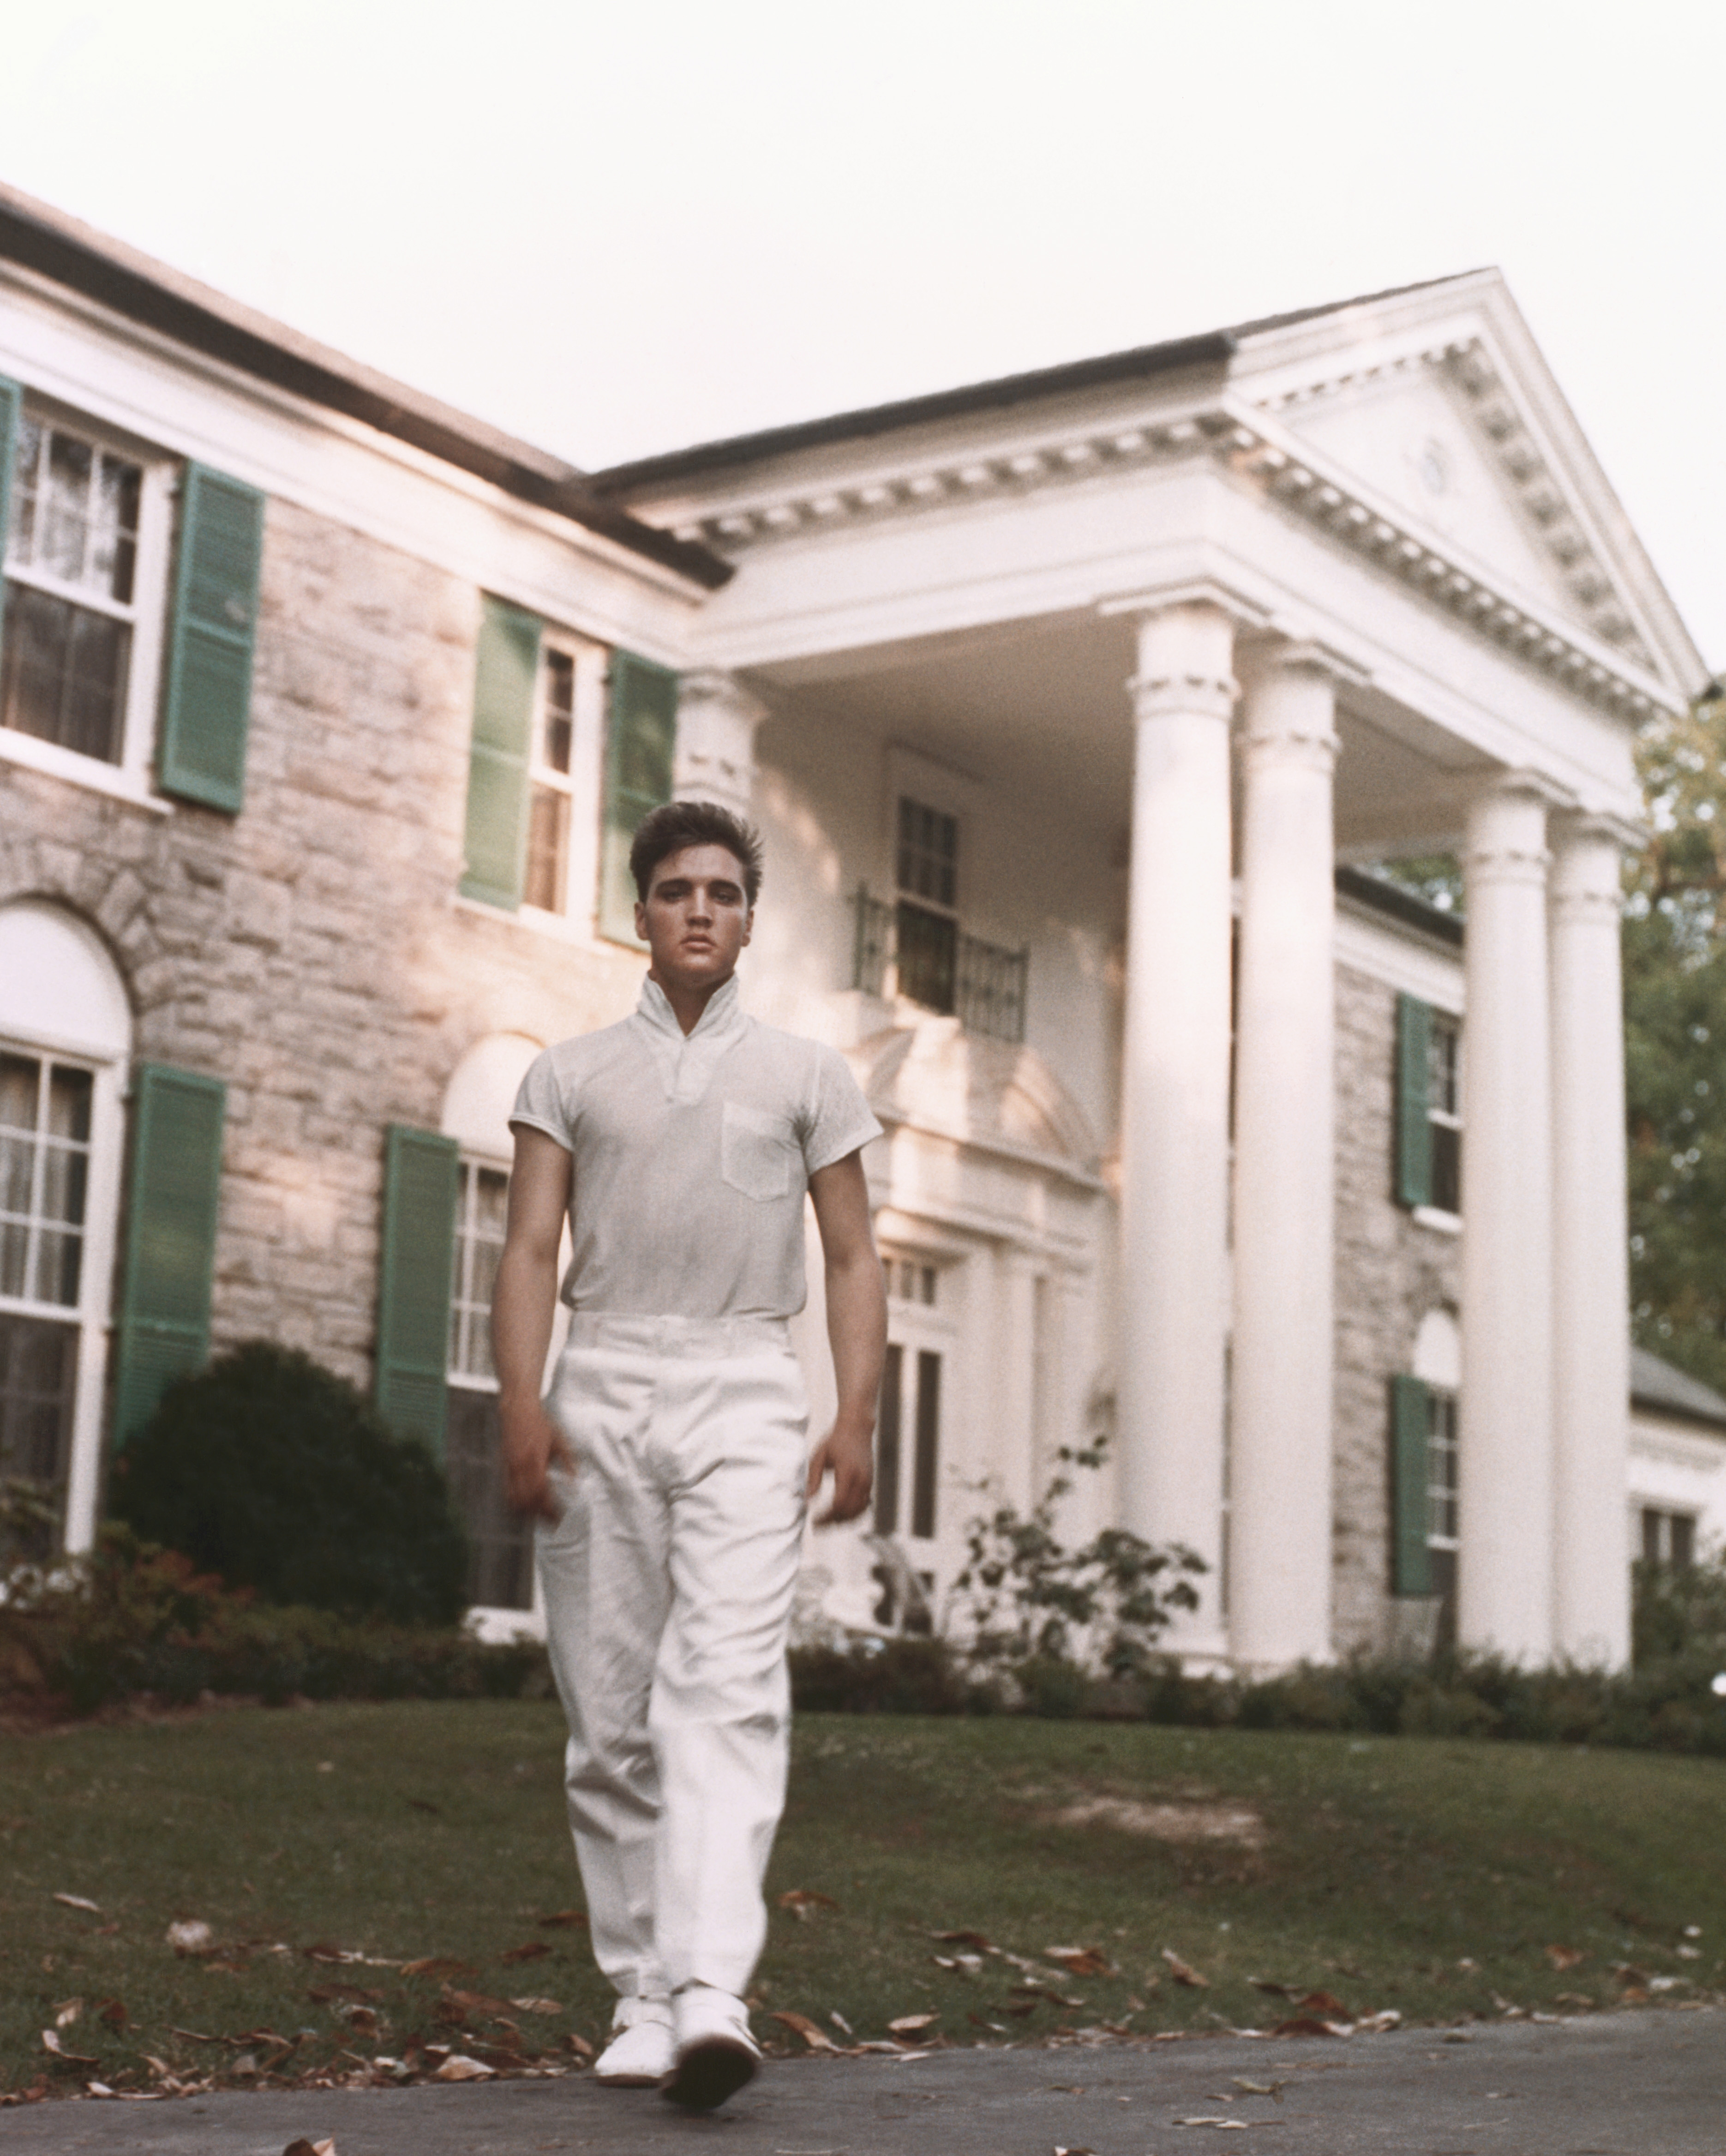 Elvis Presley strolling the grounds of his Graceland estate circa 1957 | Source: Getty Images